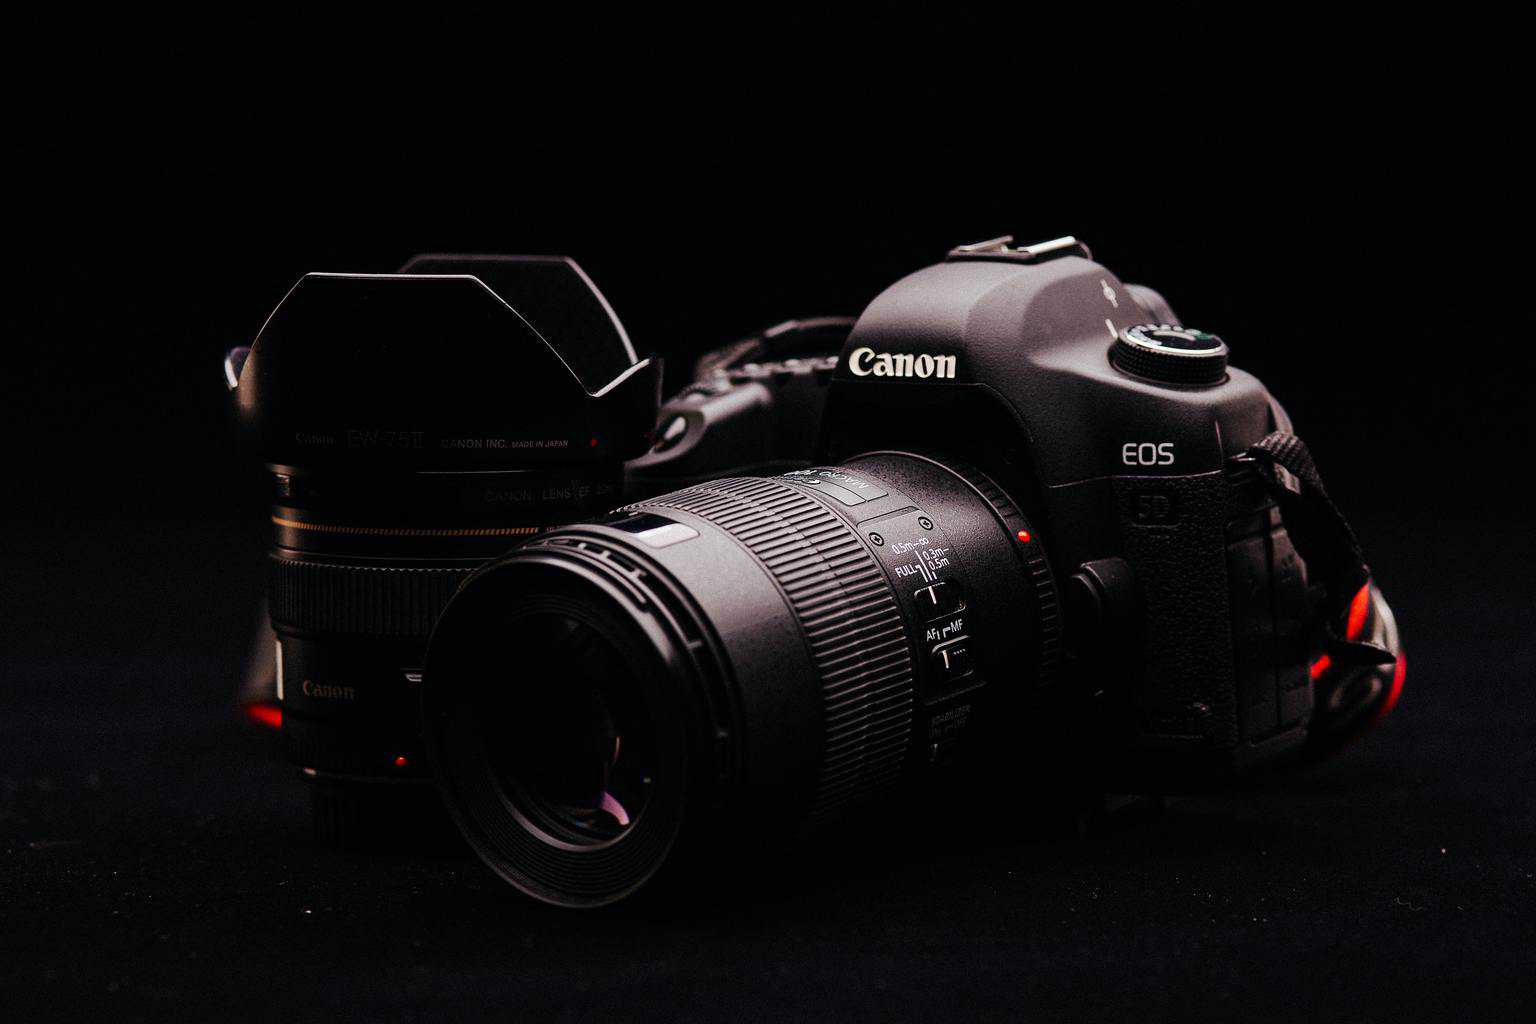 Canon Camera for Video Recording equipment to start a YouTube channel